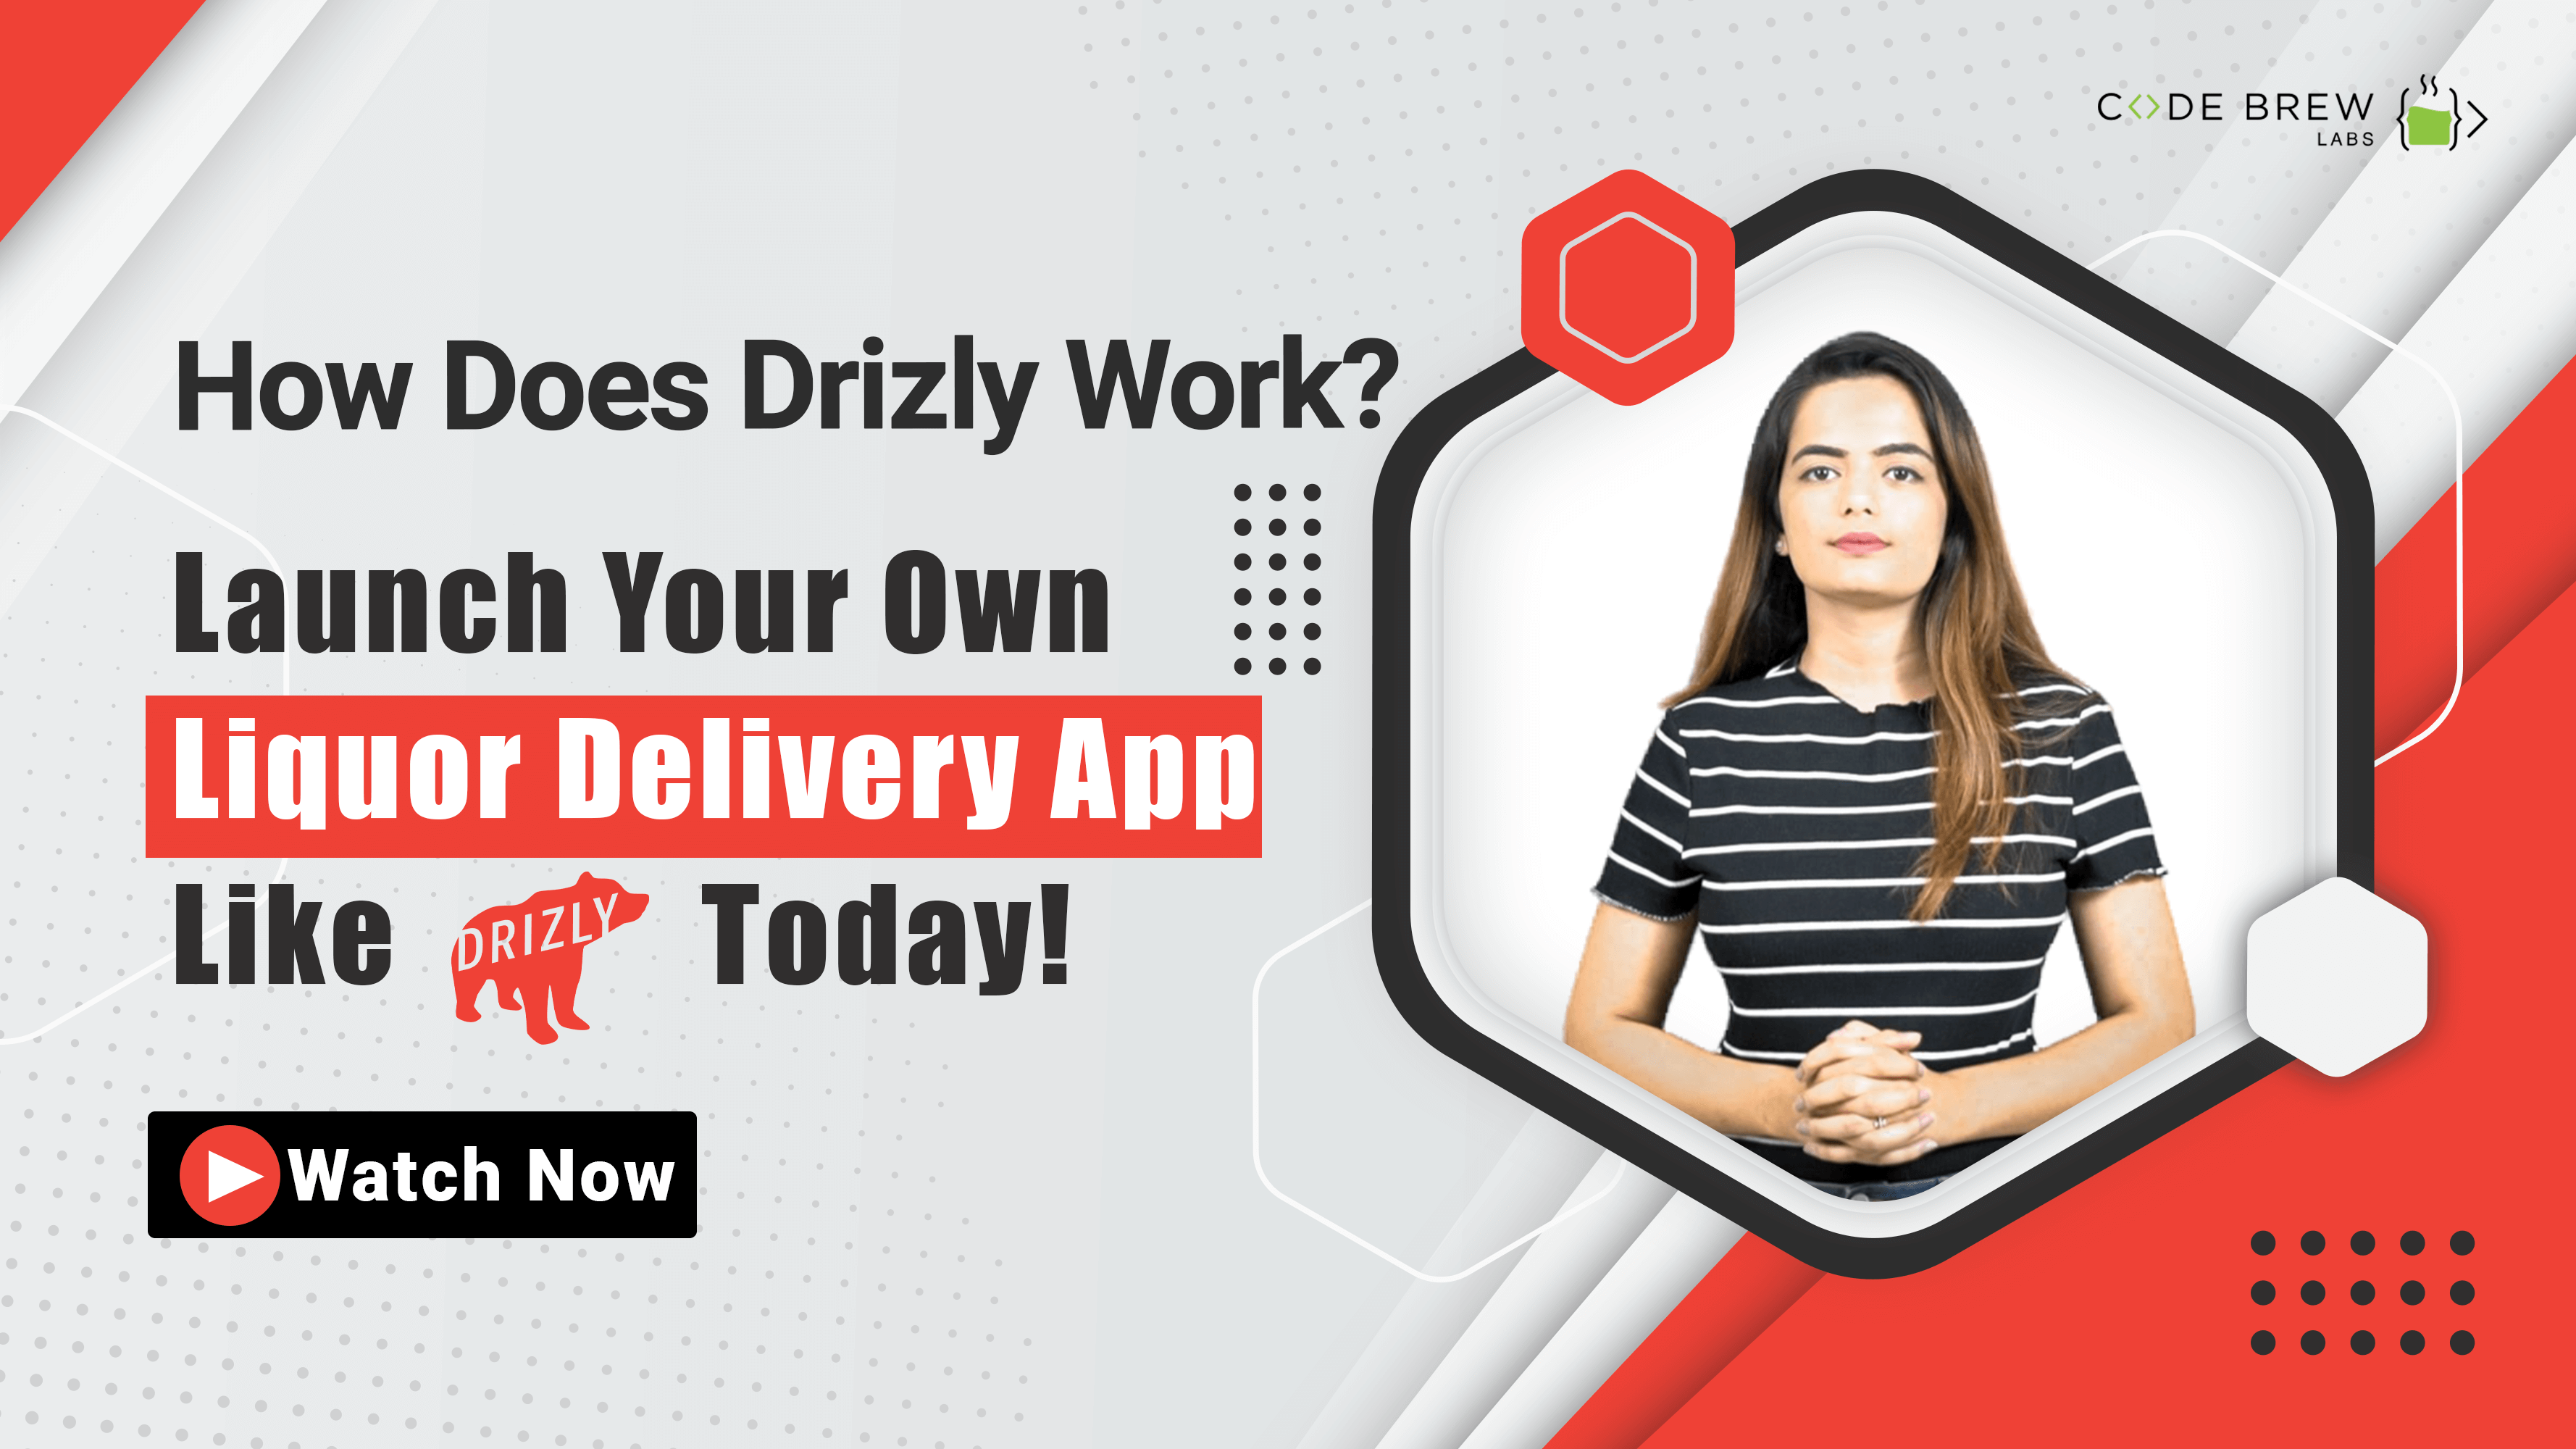 How Does Drizly Work?